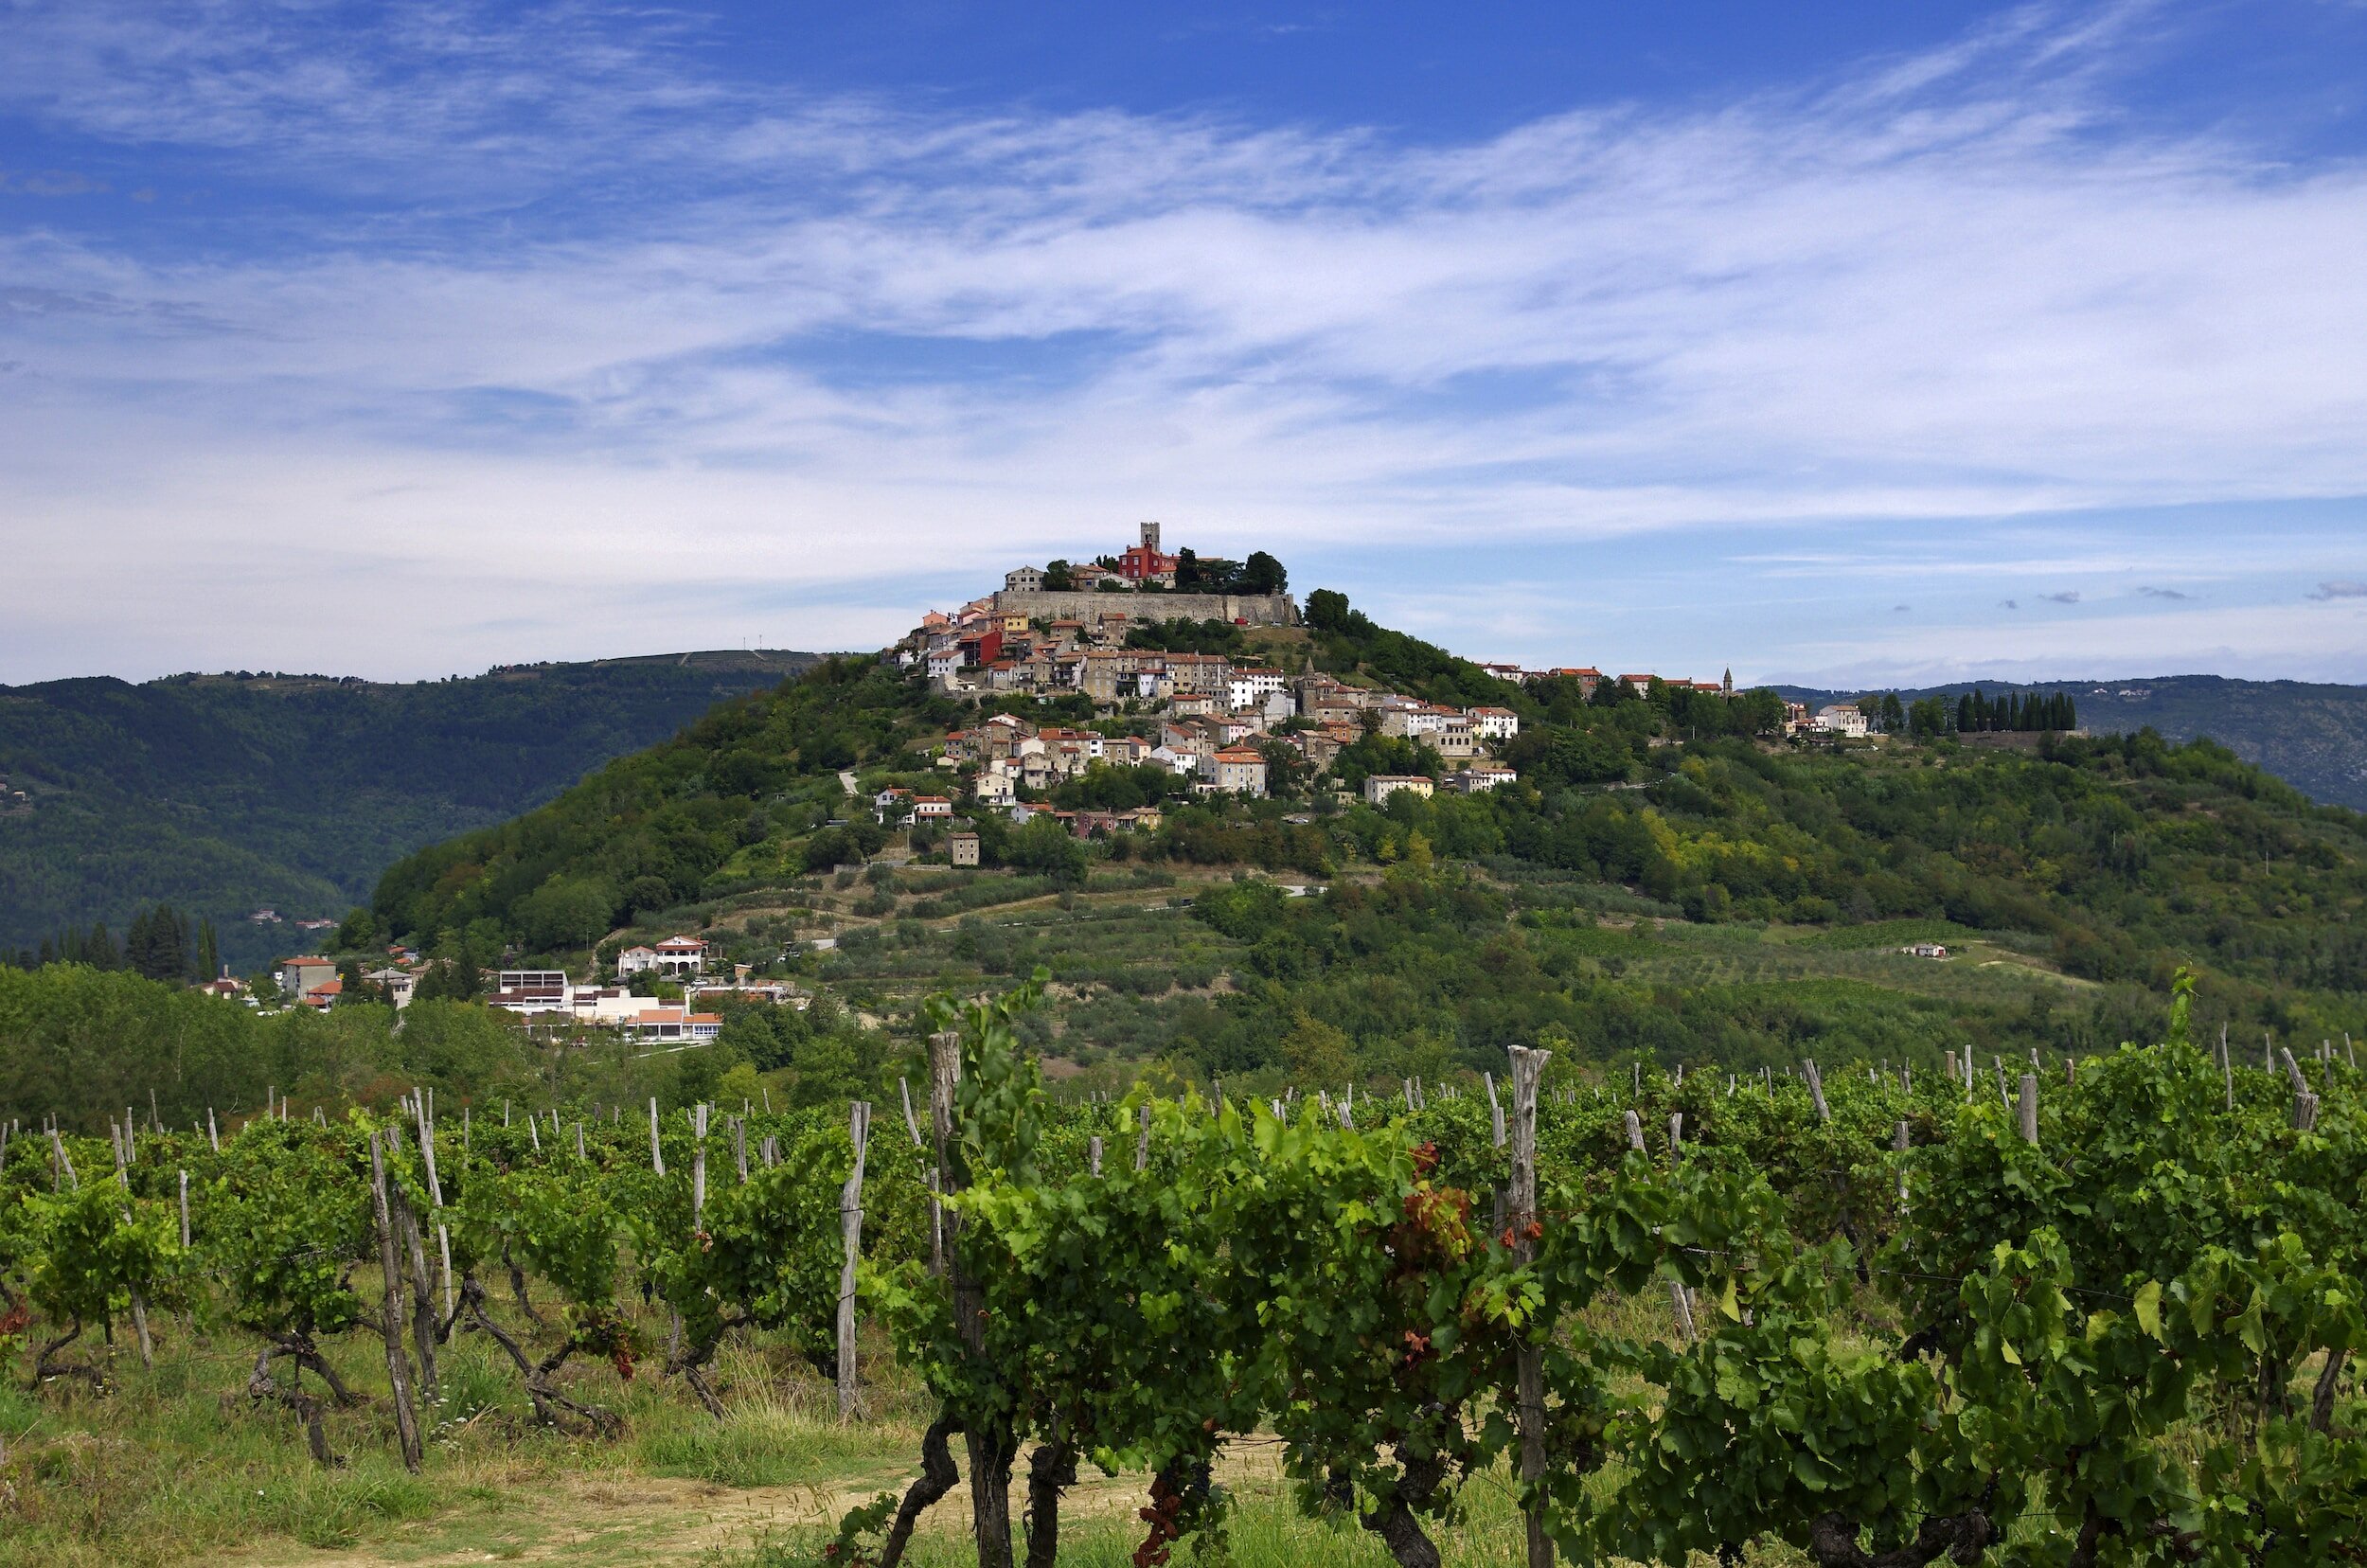 The central Istrian hilltop town of Motovun, seen from the grounds of a vineyard beneath it.